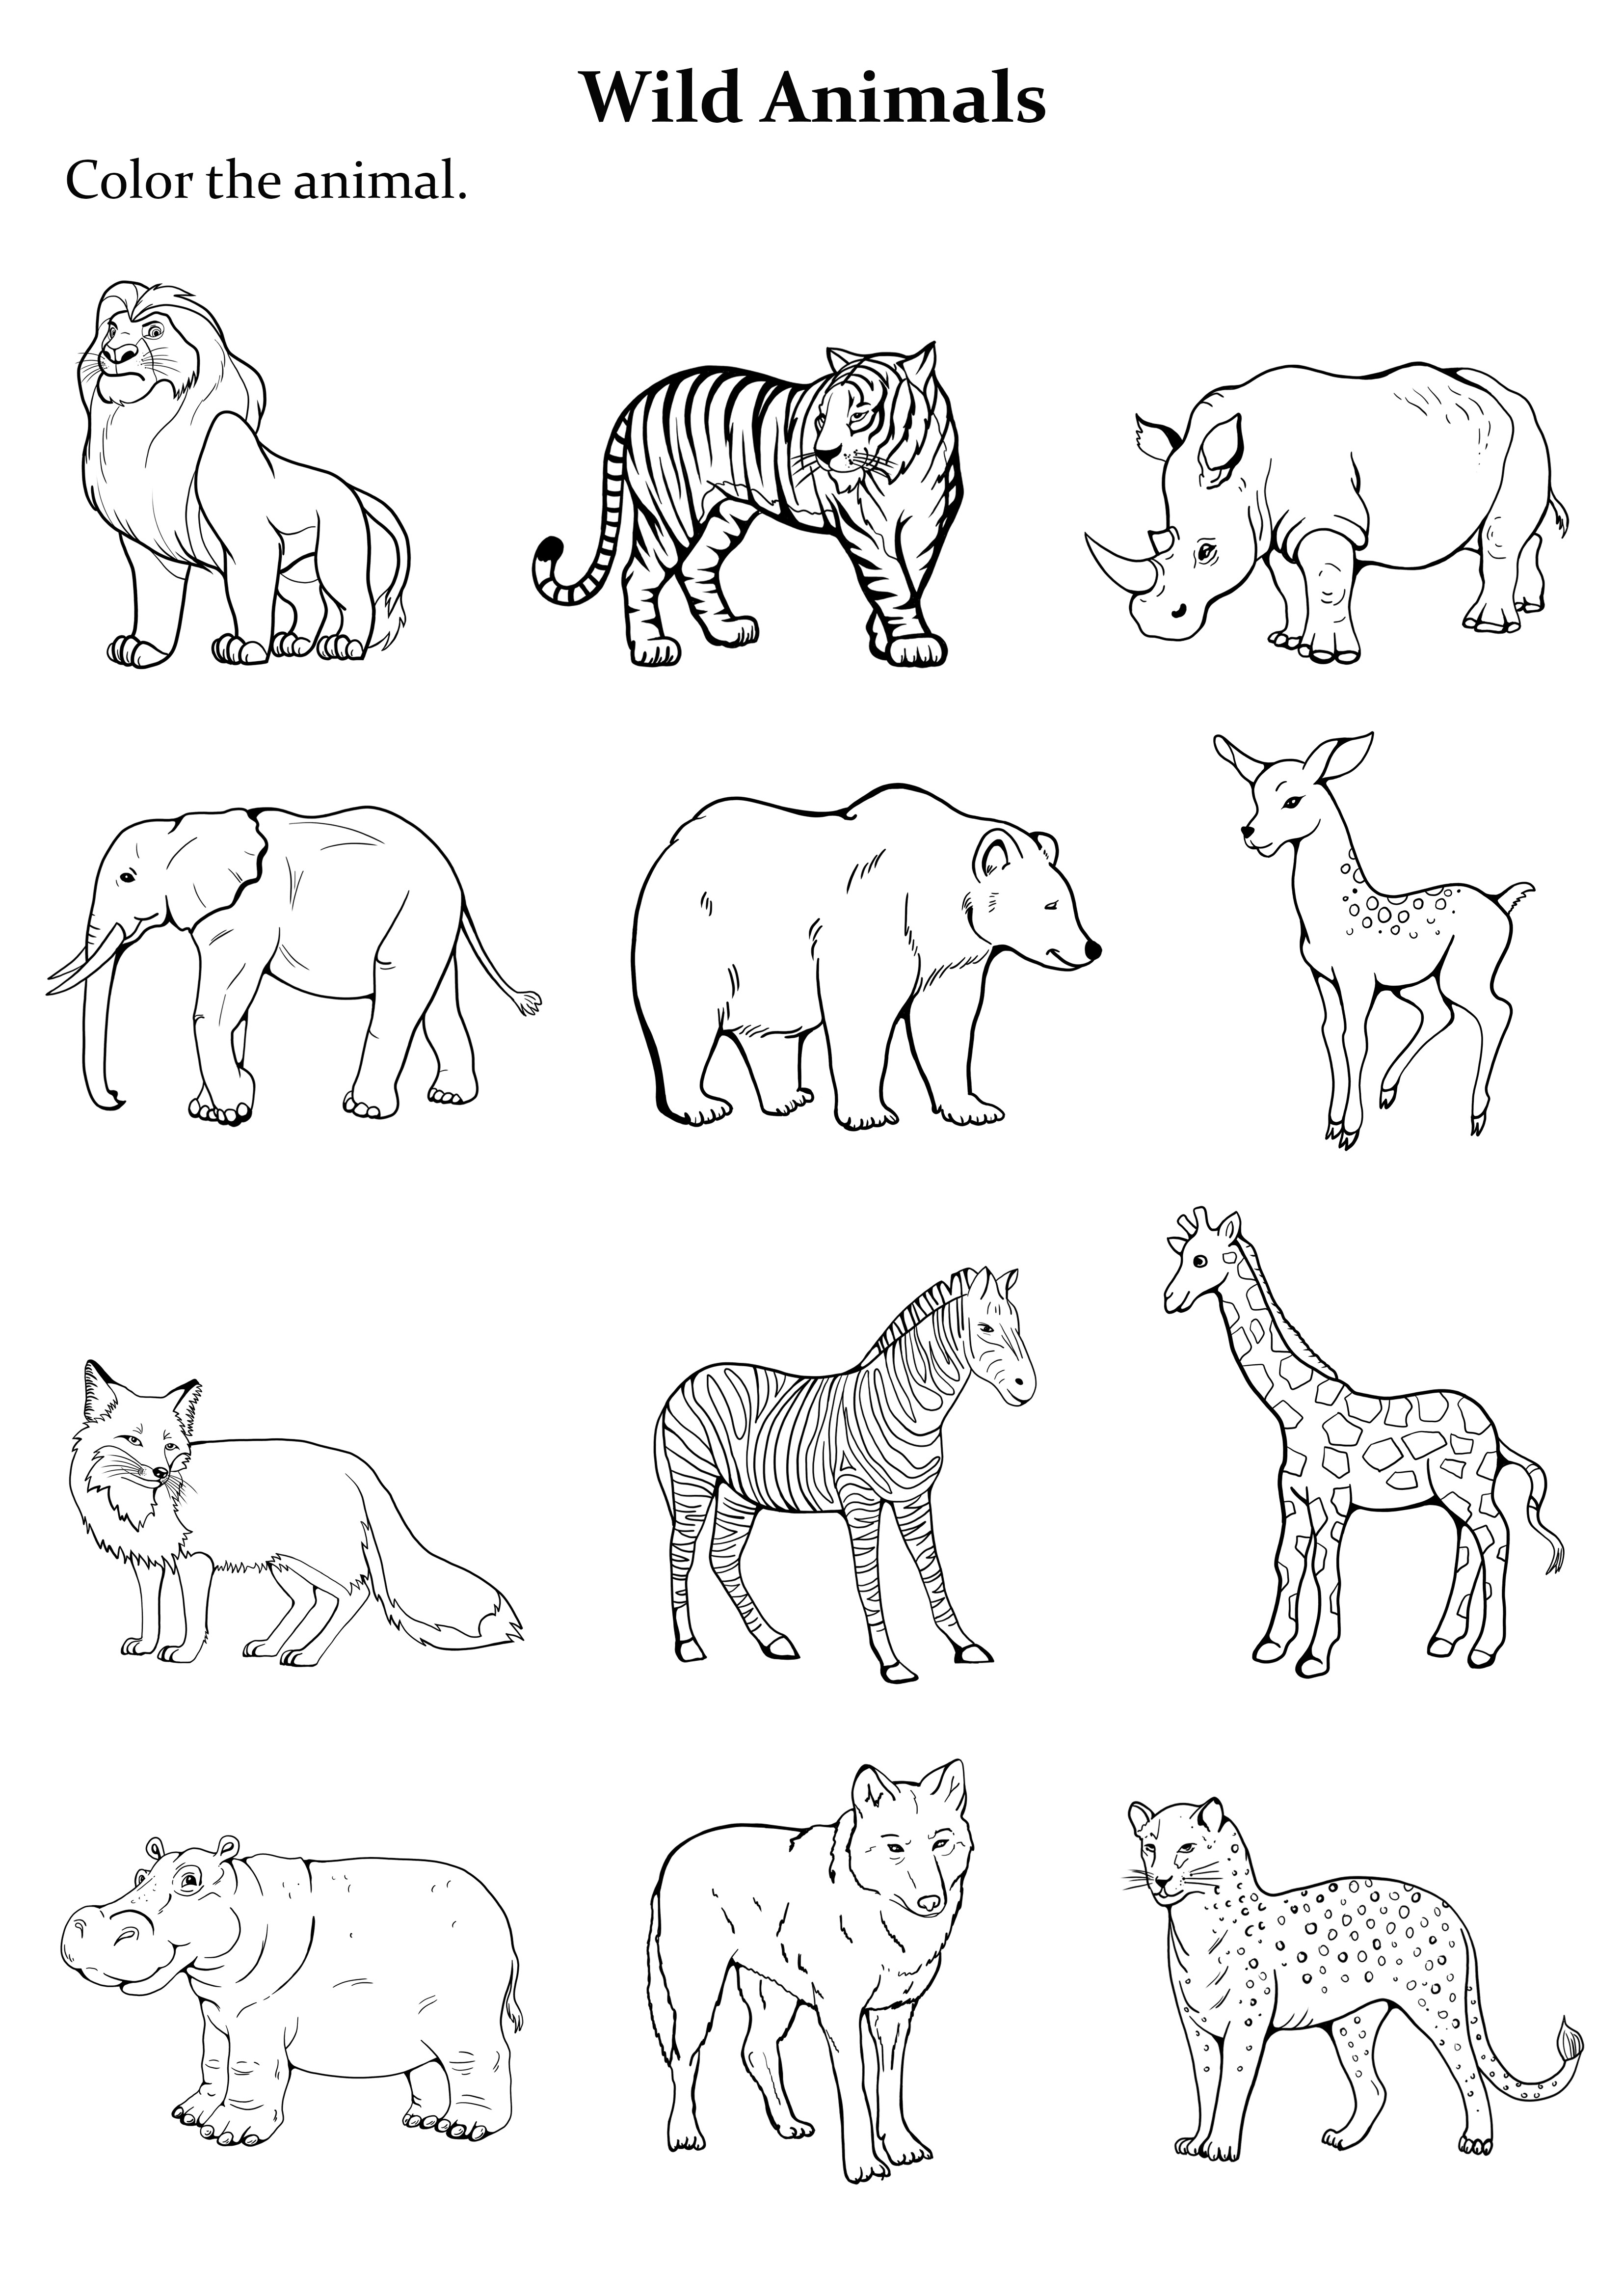 Group of 12 animals coloring page easy to print